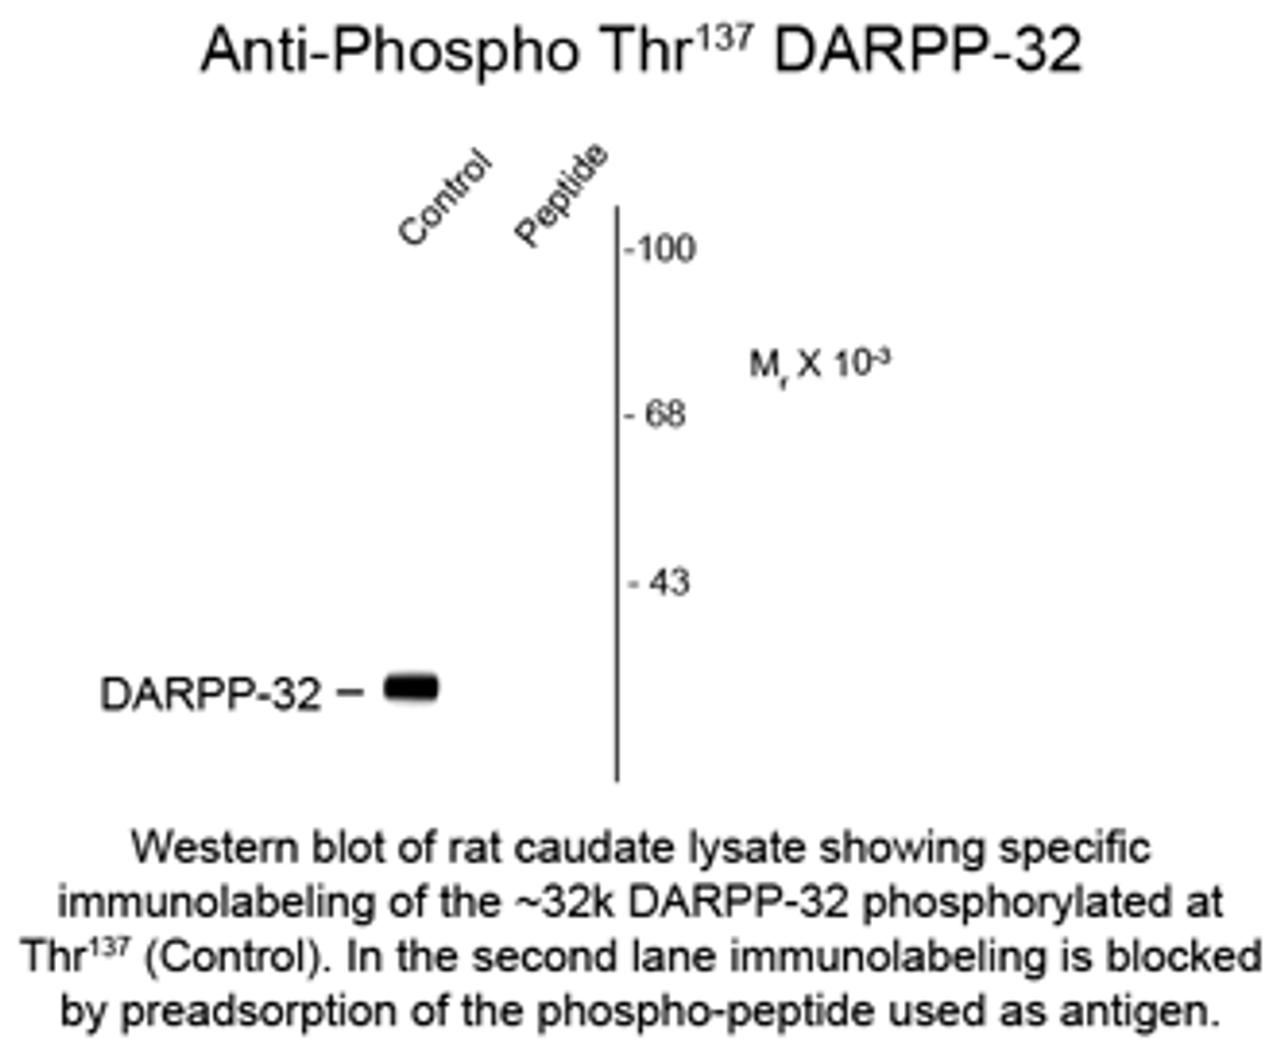 Western blot of rat caudate lysate showing specific immunolabeling of the ~32k DARPP-32 phosphorylated at Thr137 (Control) . In the second lane immunolabeling is blocked by preadsorption of the phospho-peptide used as antigen.